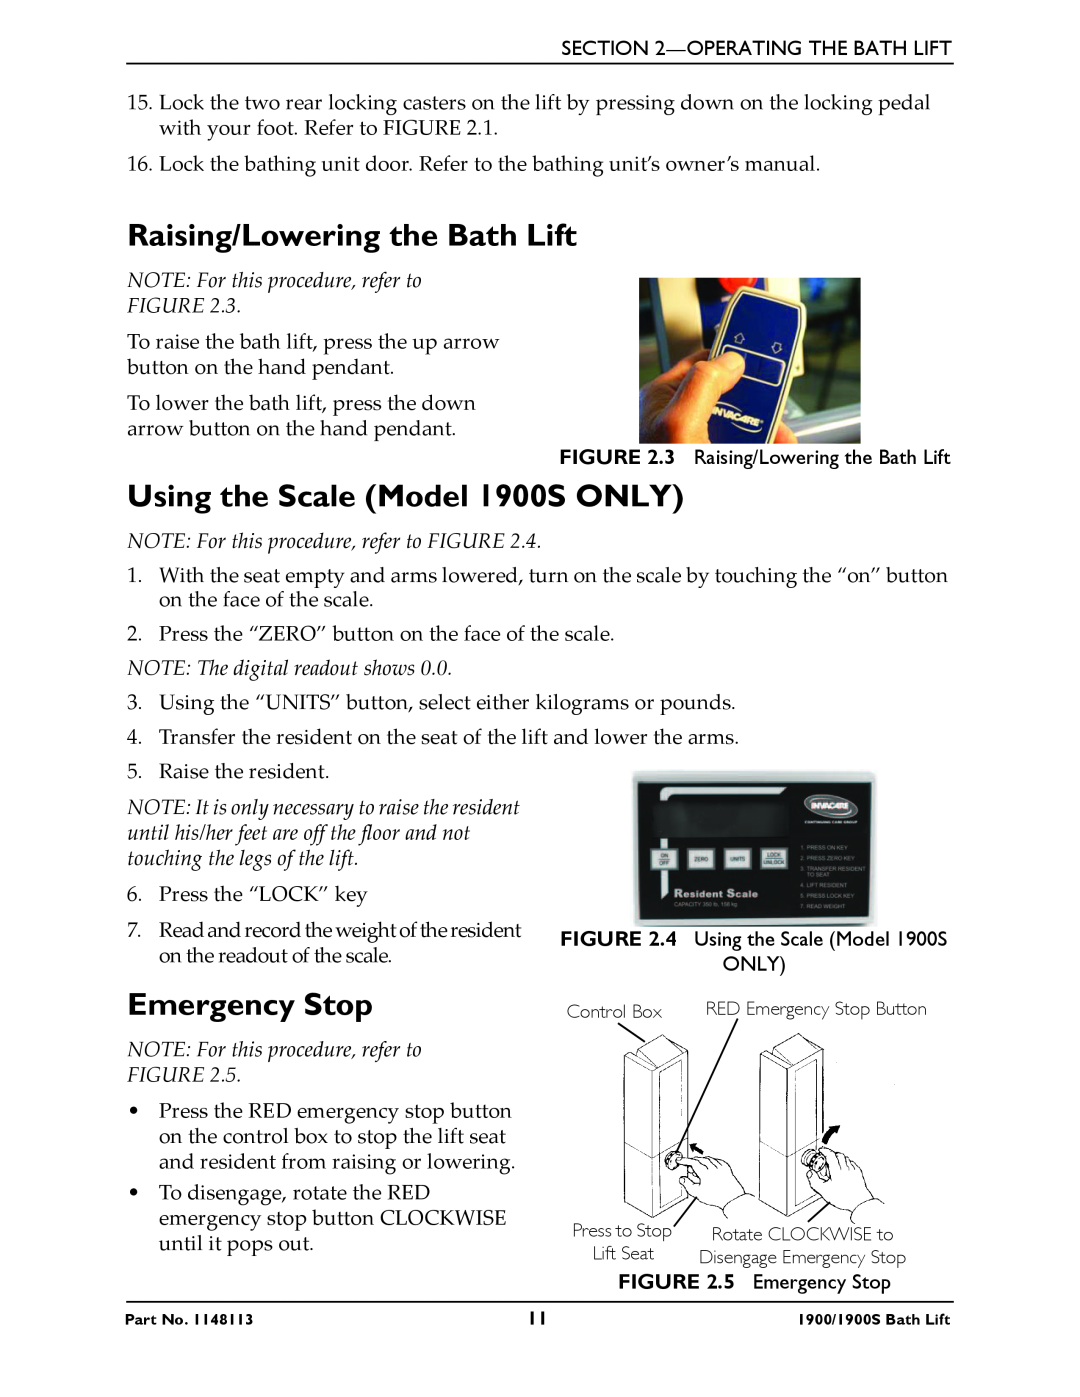 Invacare manual Raising/Lowering the Bath Lift, Using the Scale Model 1900S ONLY, Emergency Stop 